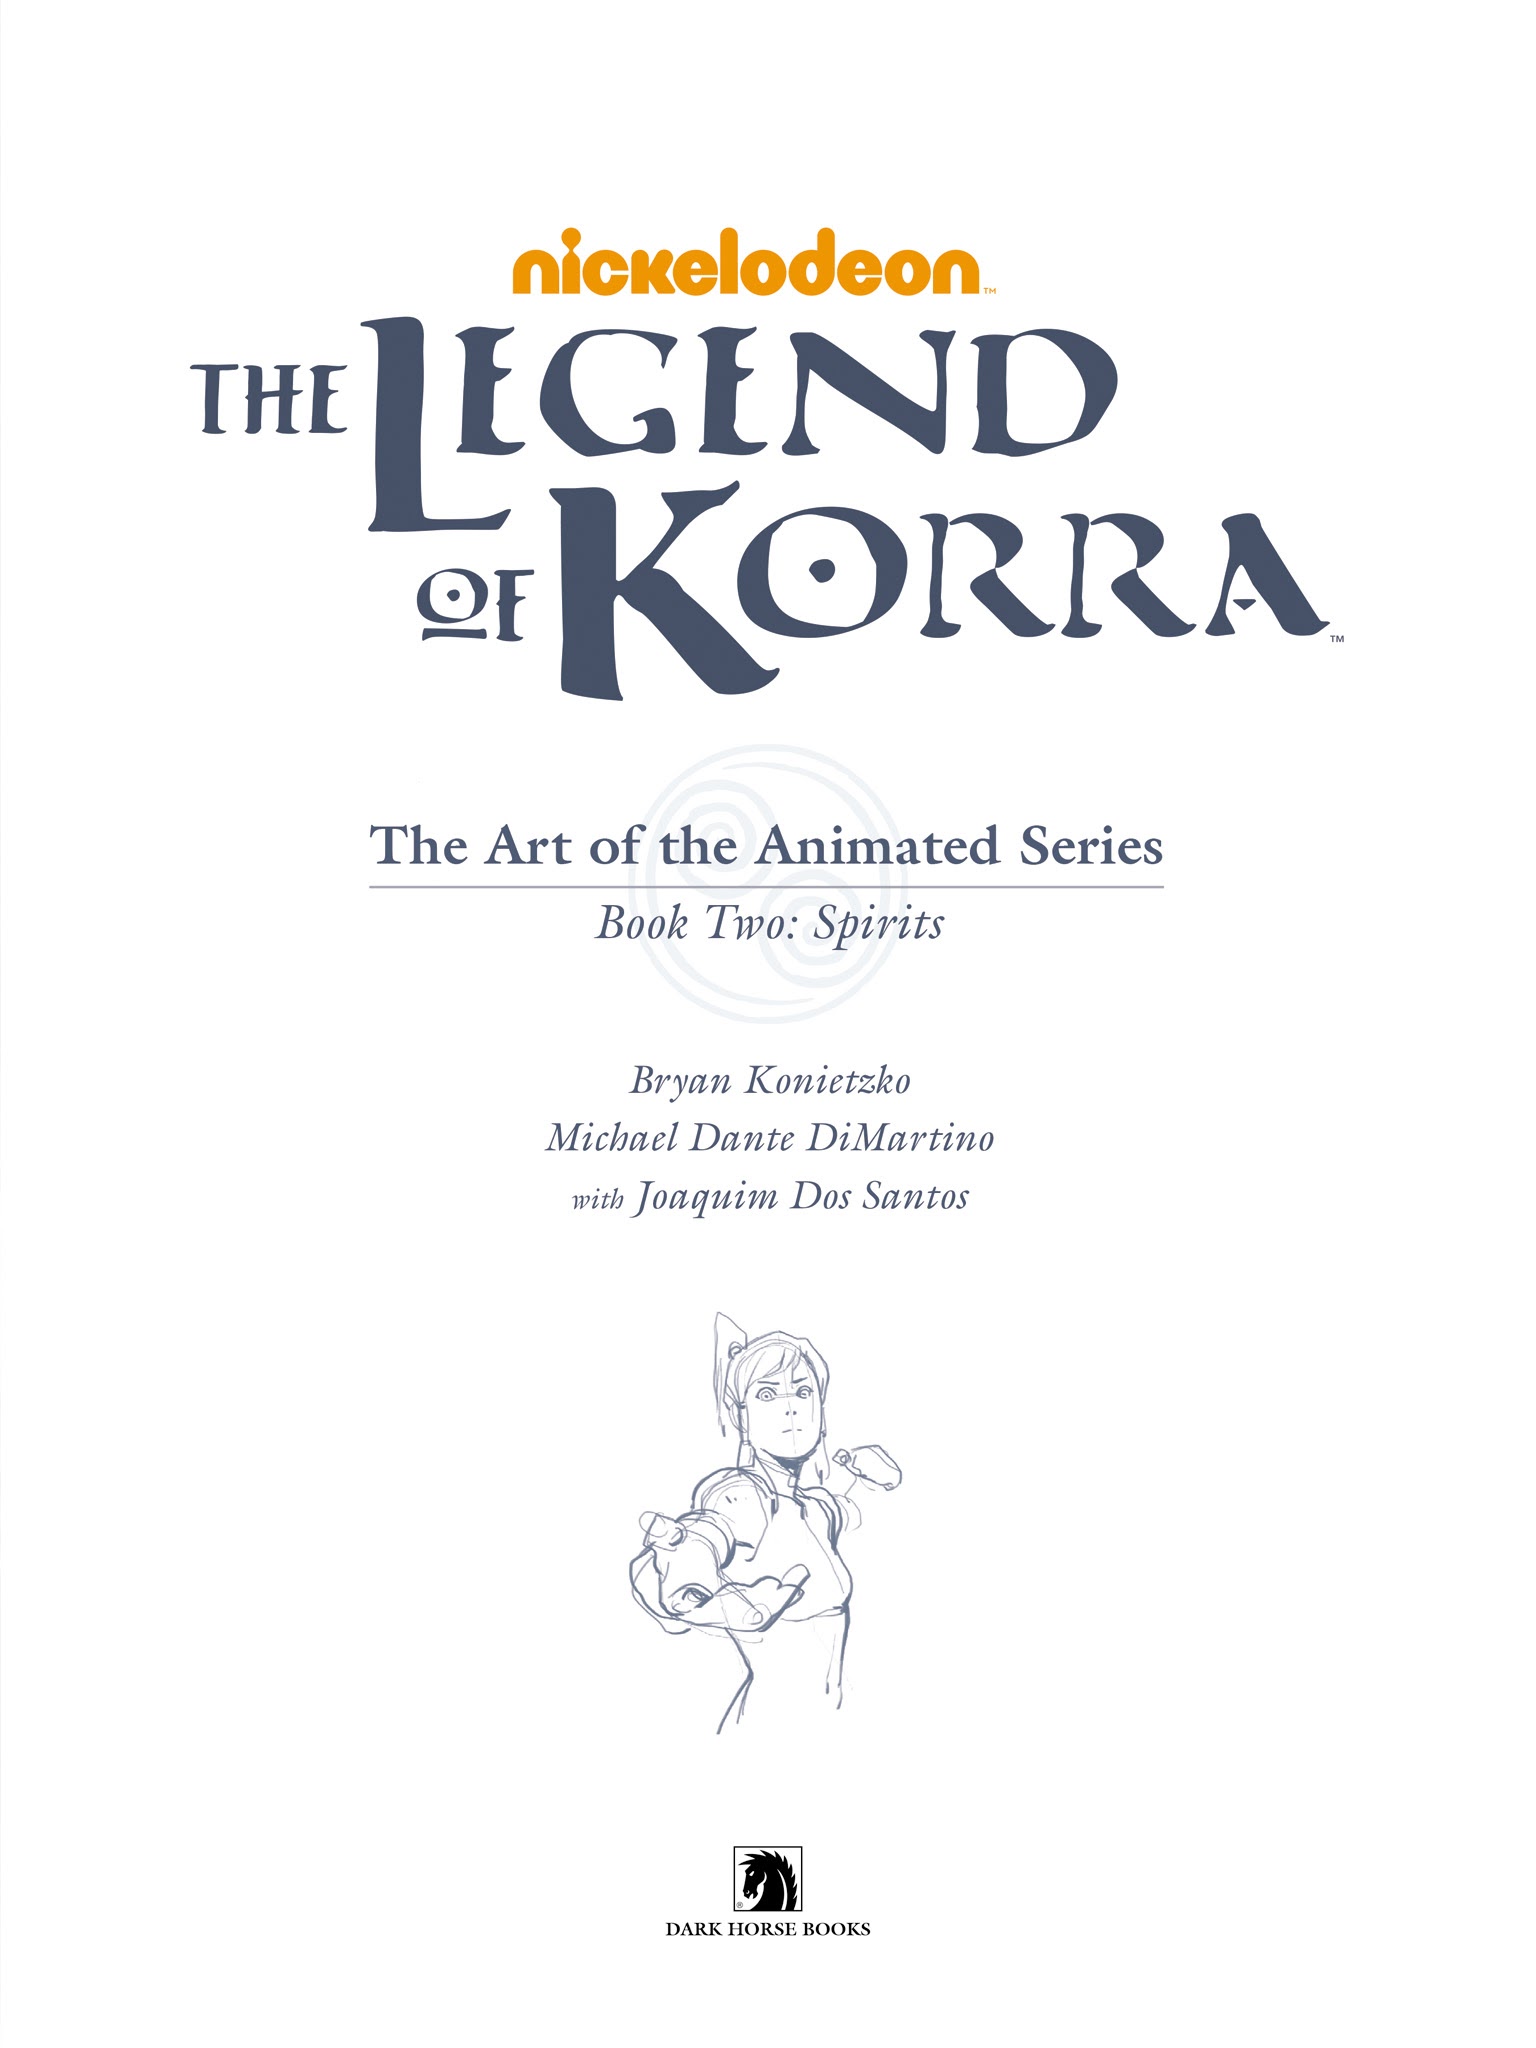 Read online The Legend of Korra: The Art of the Animated Series comic -  Issue # TPB 2 - 4